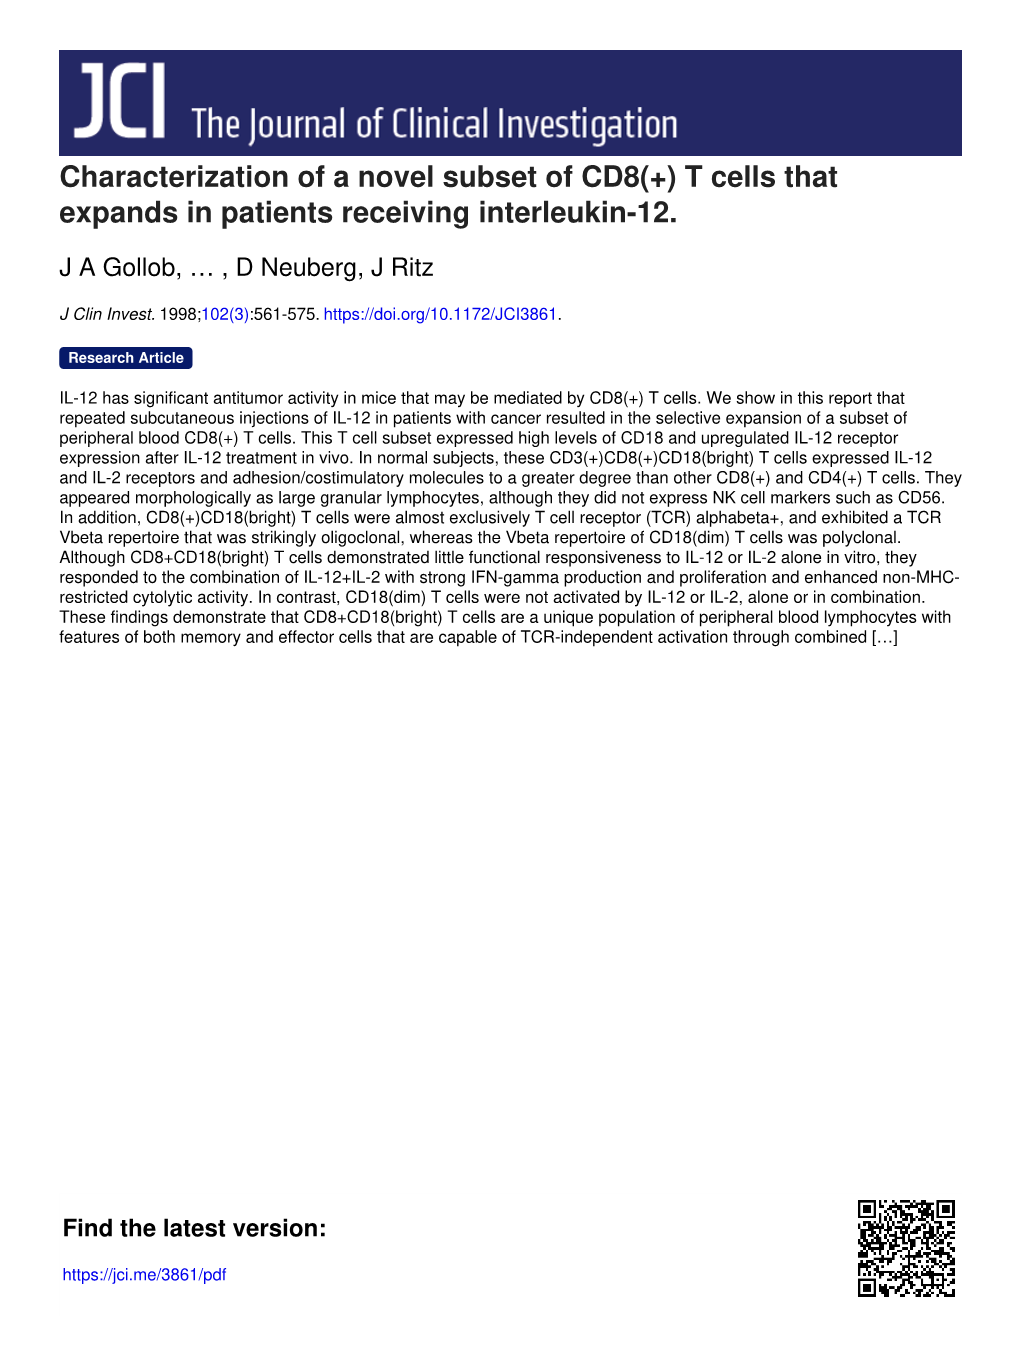 T Cells That Expands in Patients Receiving Interleukin-12